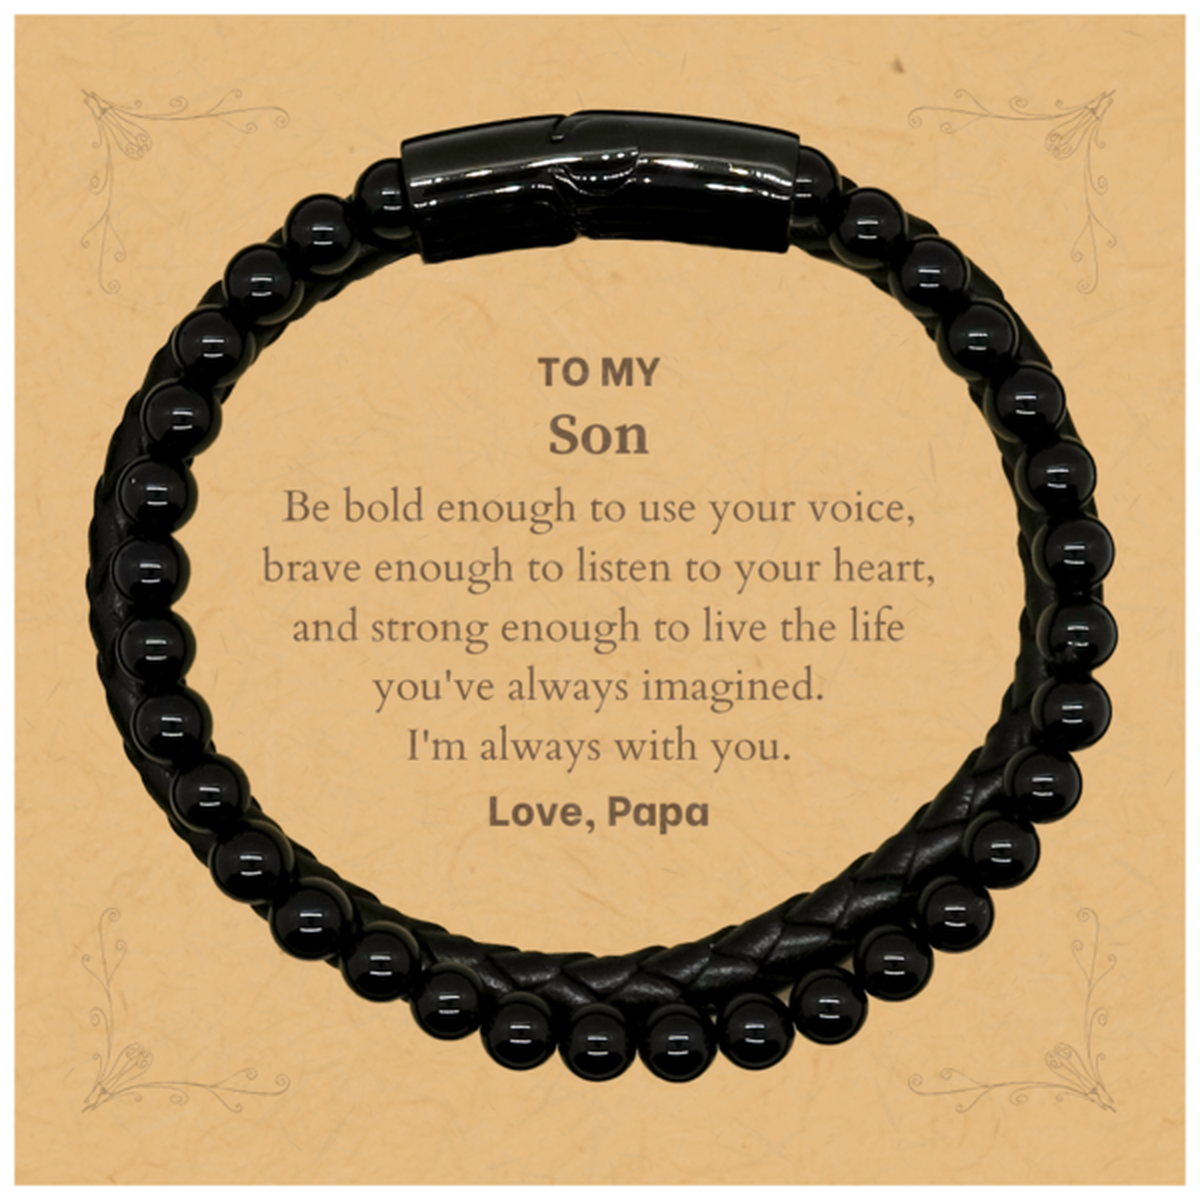 Keepsake Son Stone Leather Bracelets Gift Idea Graduation Christmas Birthday Son from Papa, Son Be bold enough to use your voice, brave enough to listen to your heart. Love, Papa